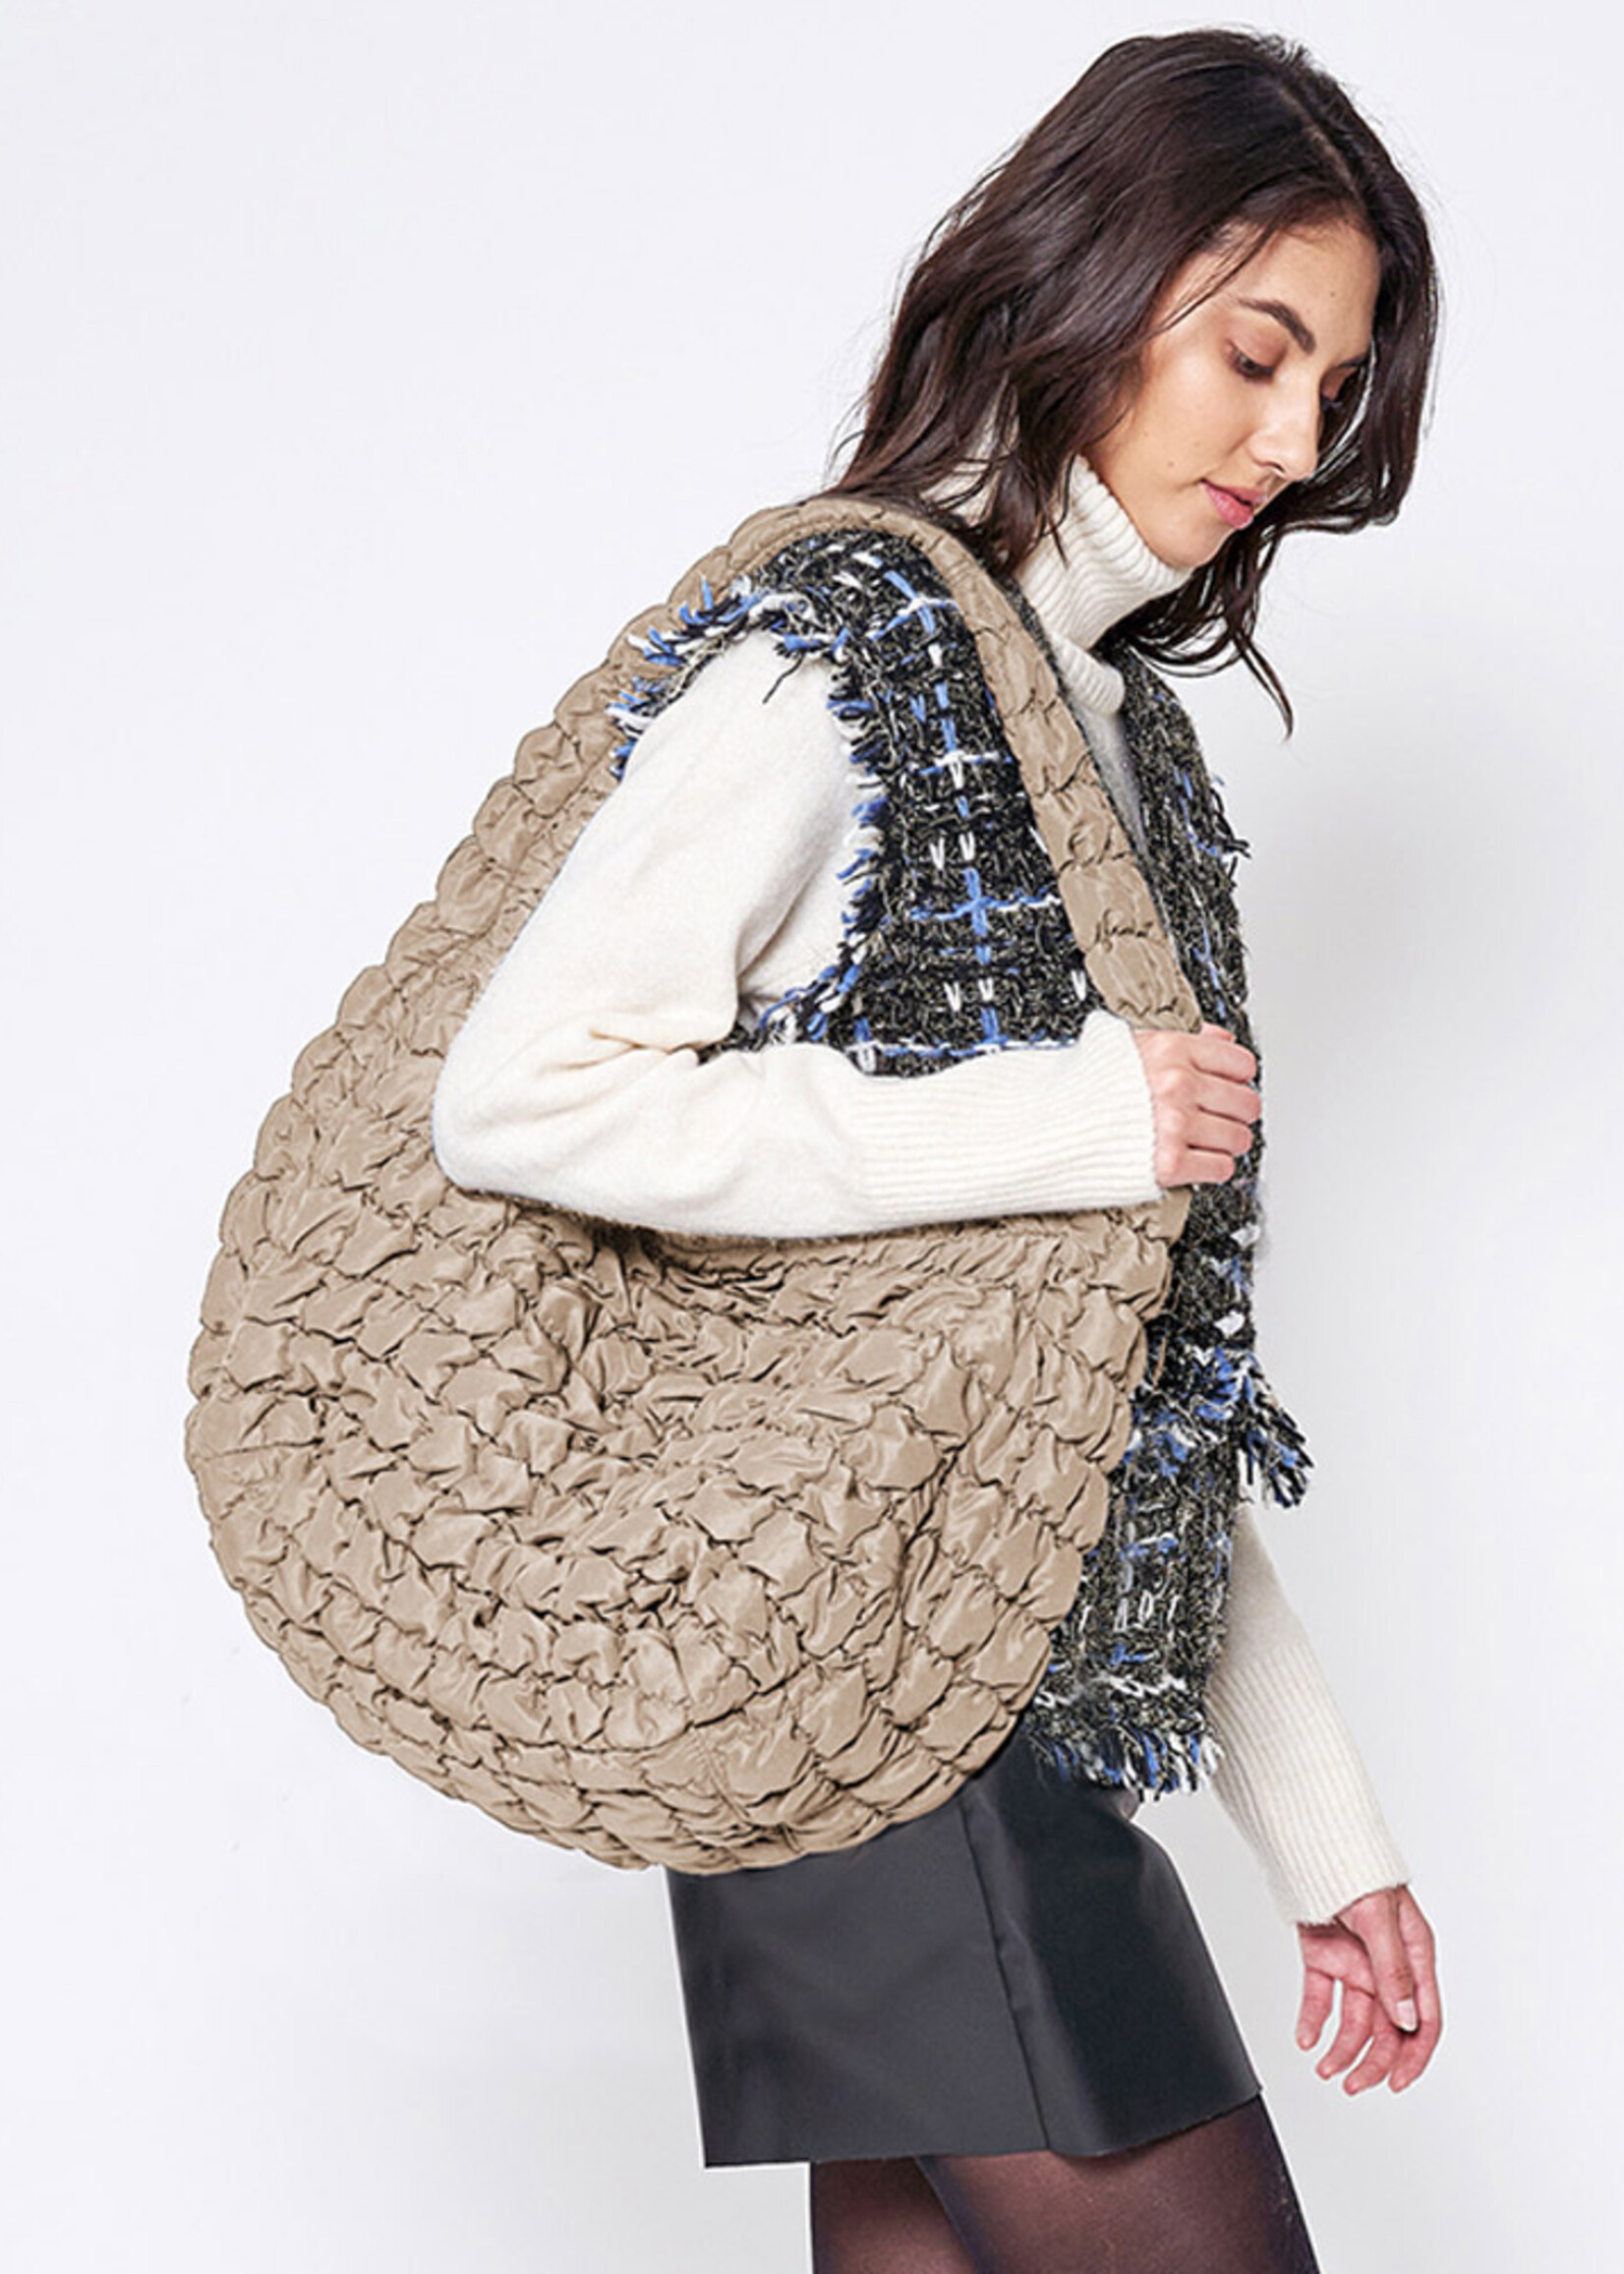 Large quilted bag +2 colors